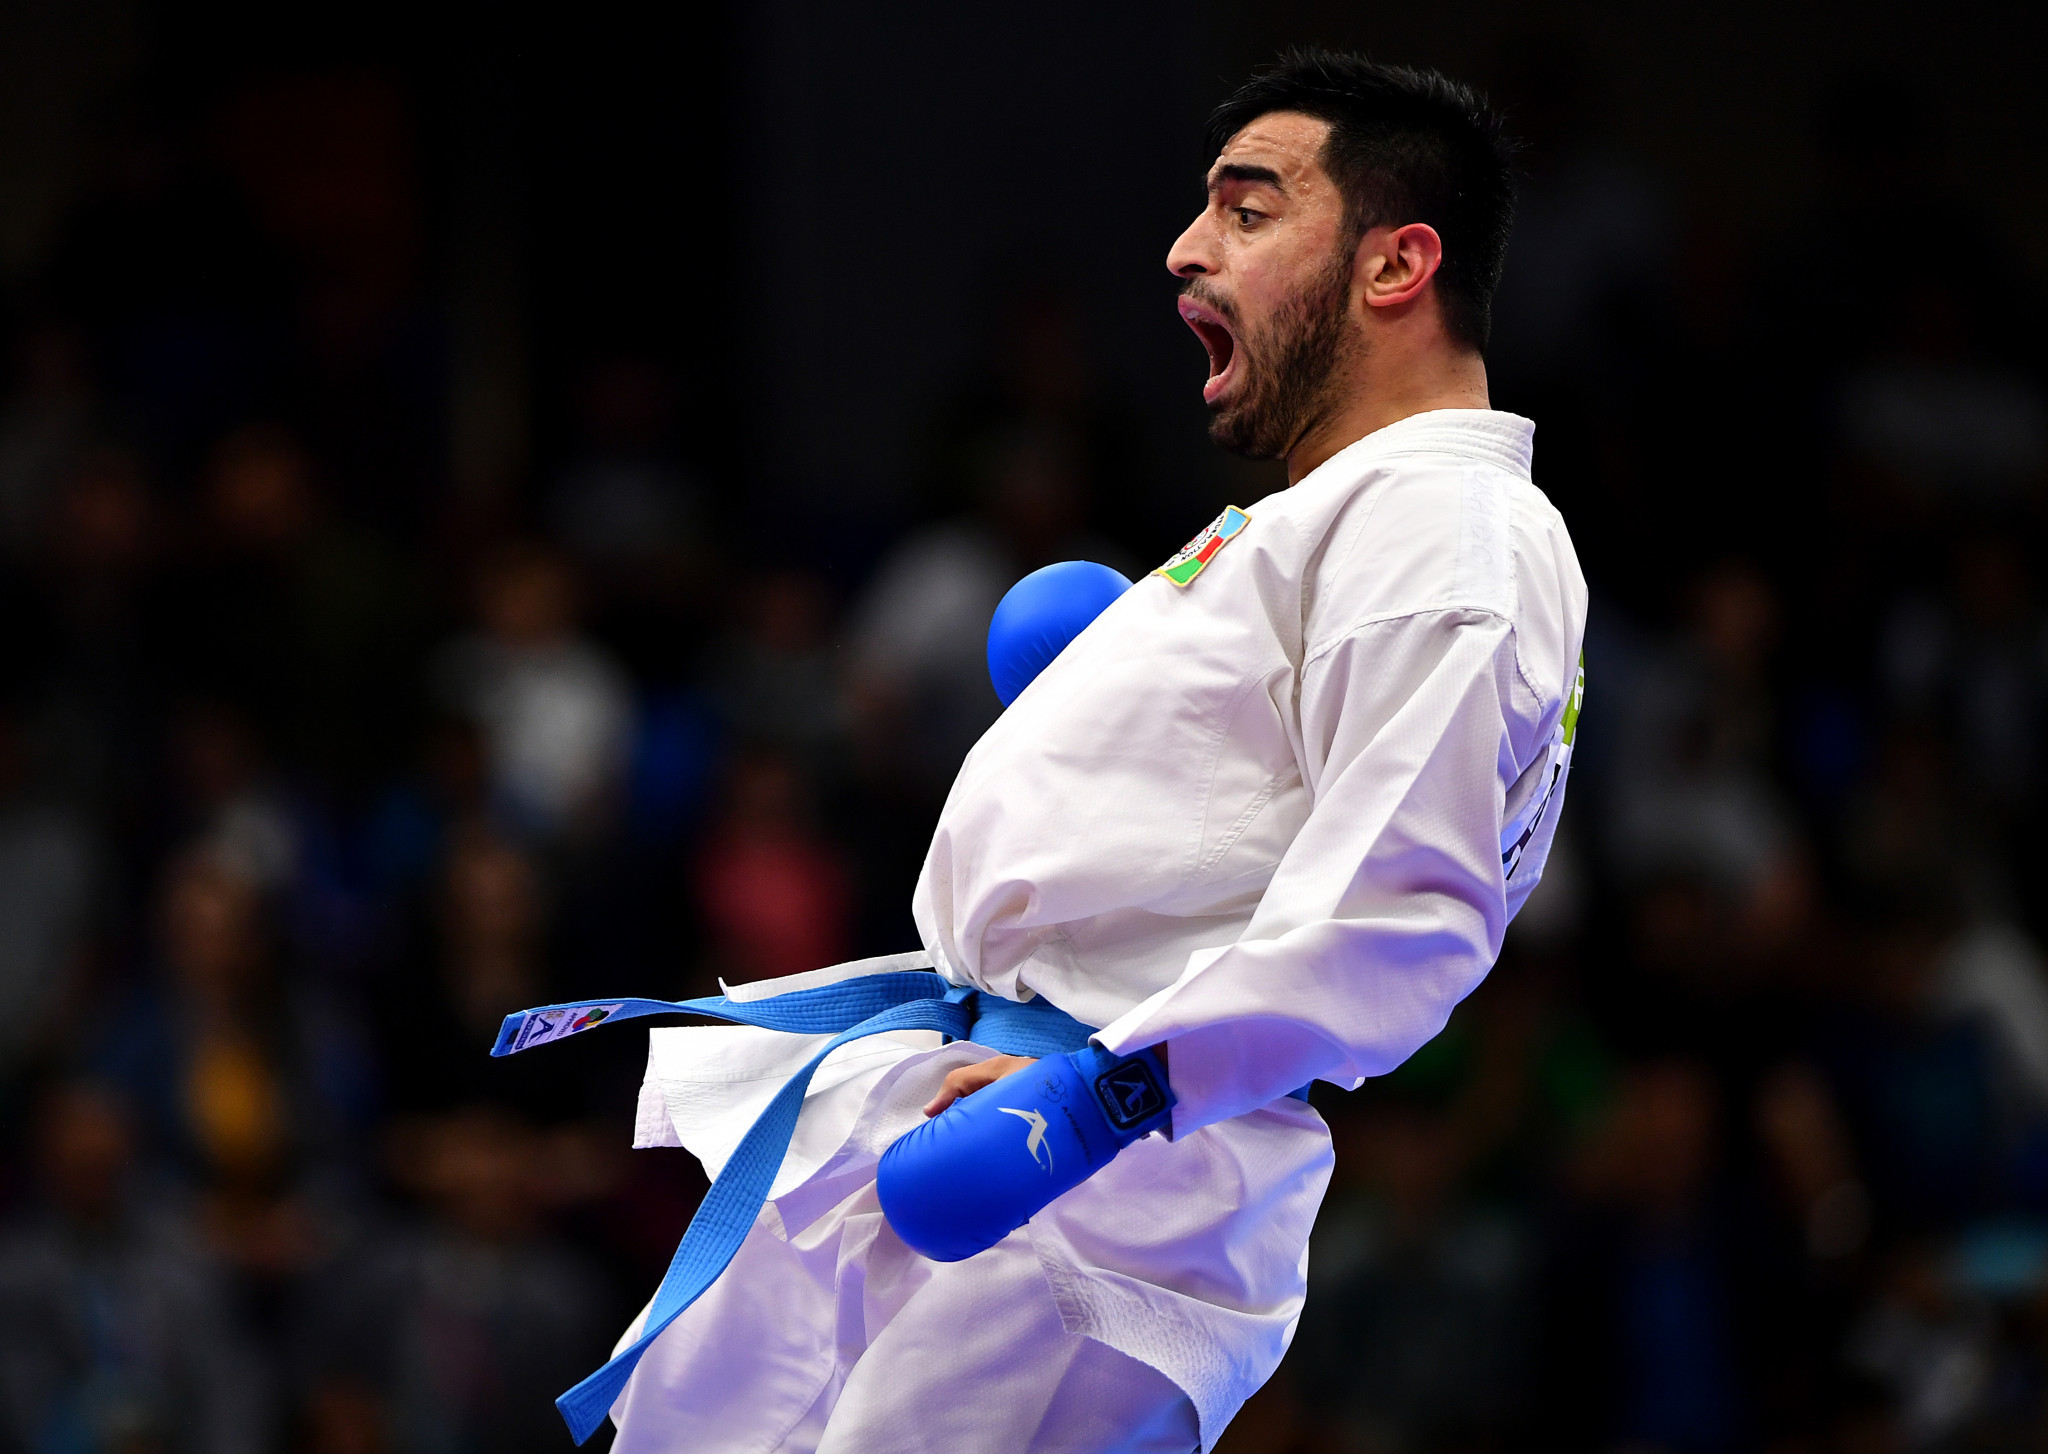 Asiman Gurbanli was one of three winners for hosts Azerbaijan at the Karate 1-Premier League event in Baku ©Getty Images